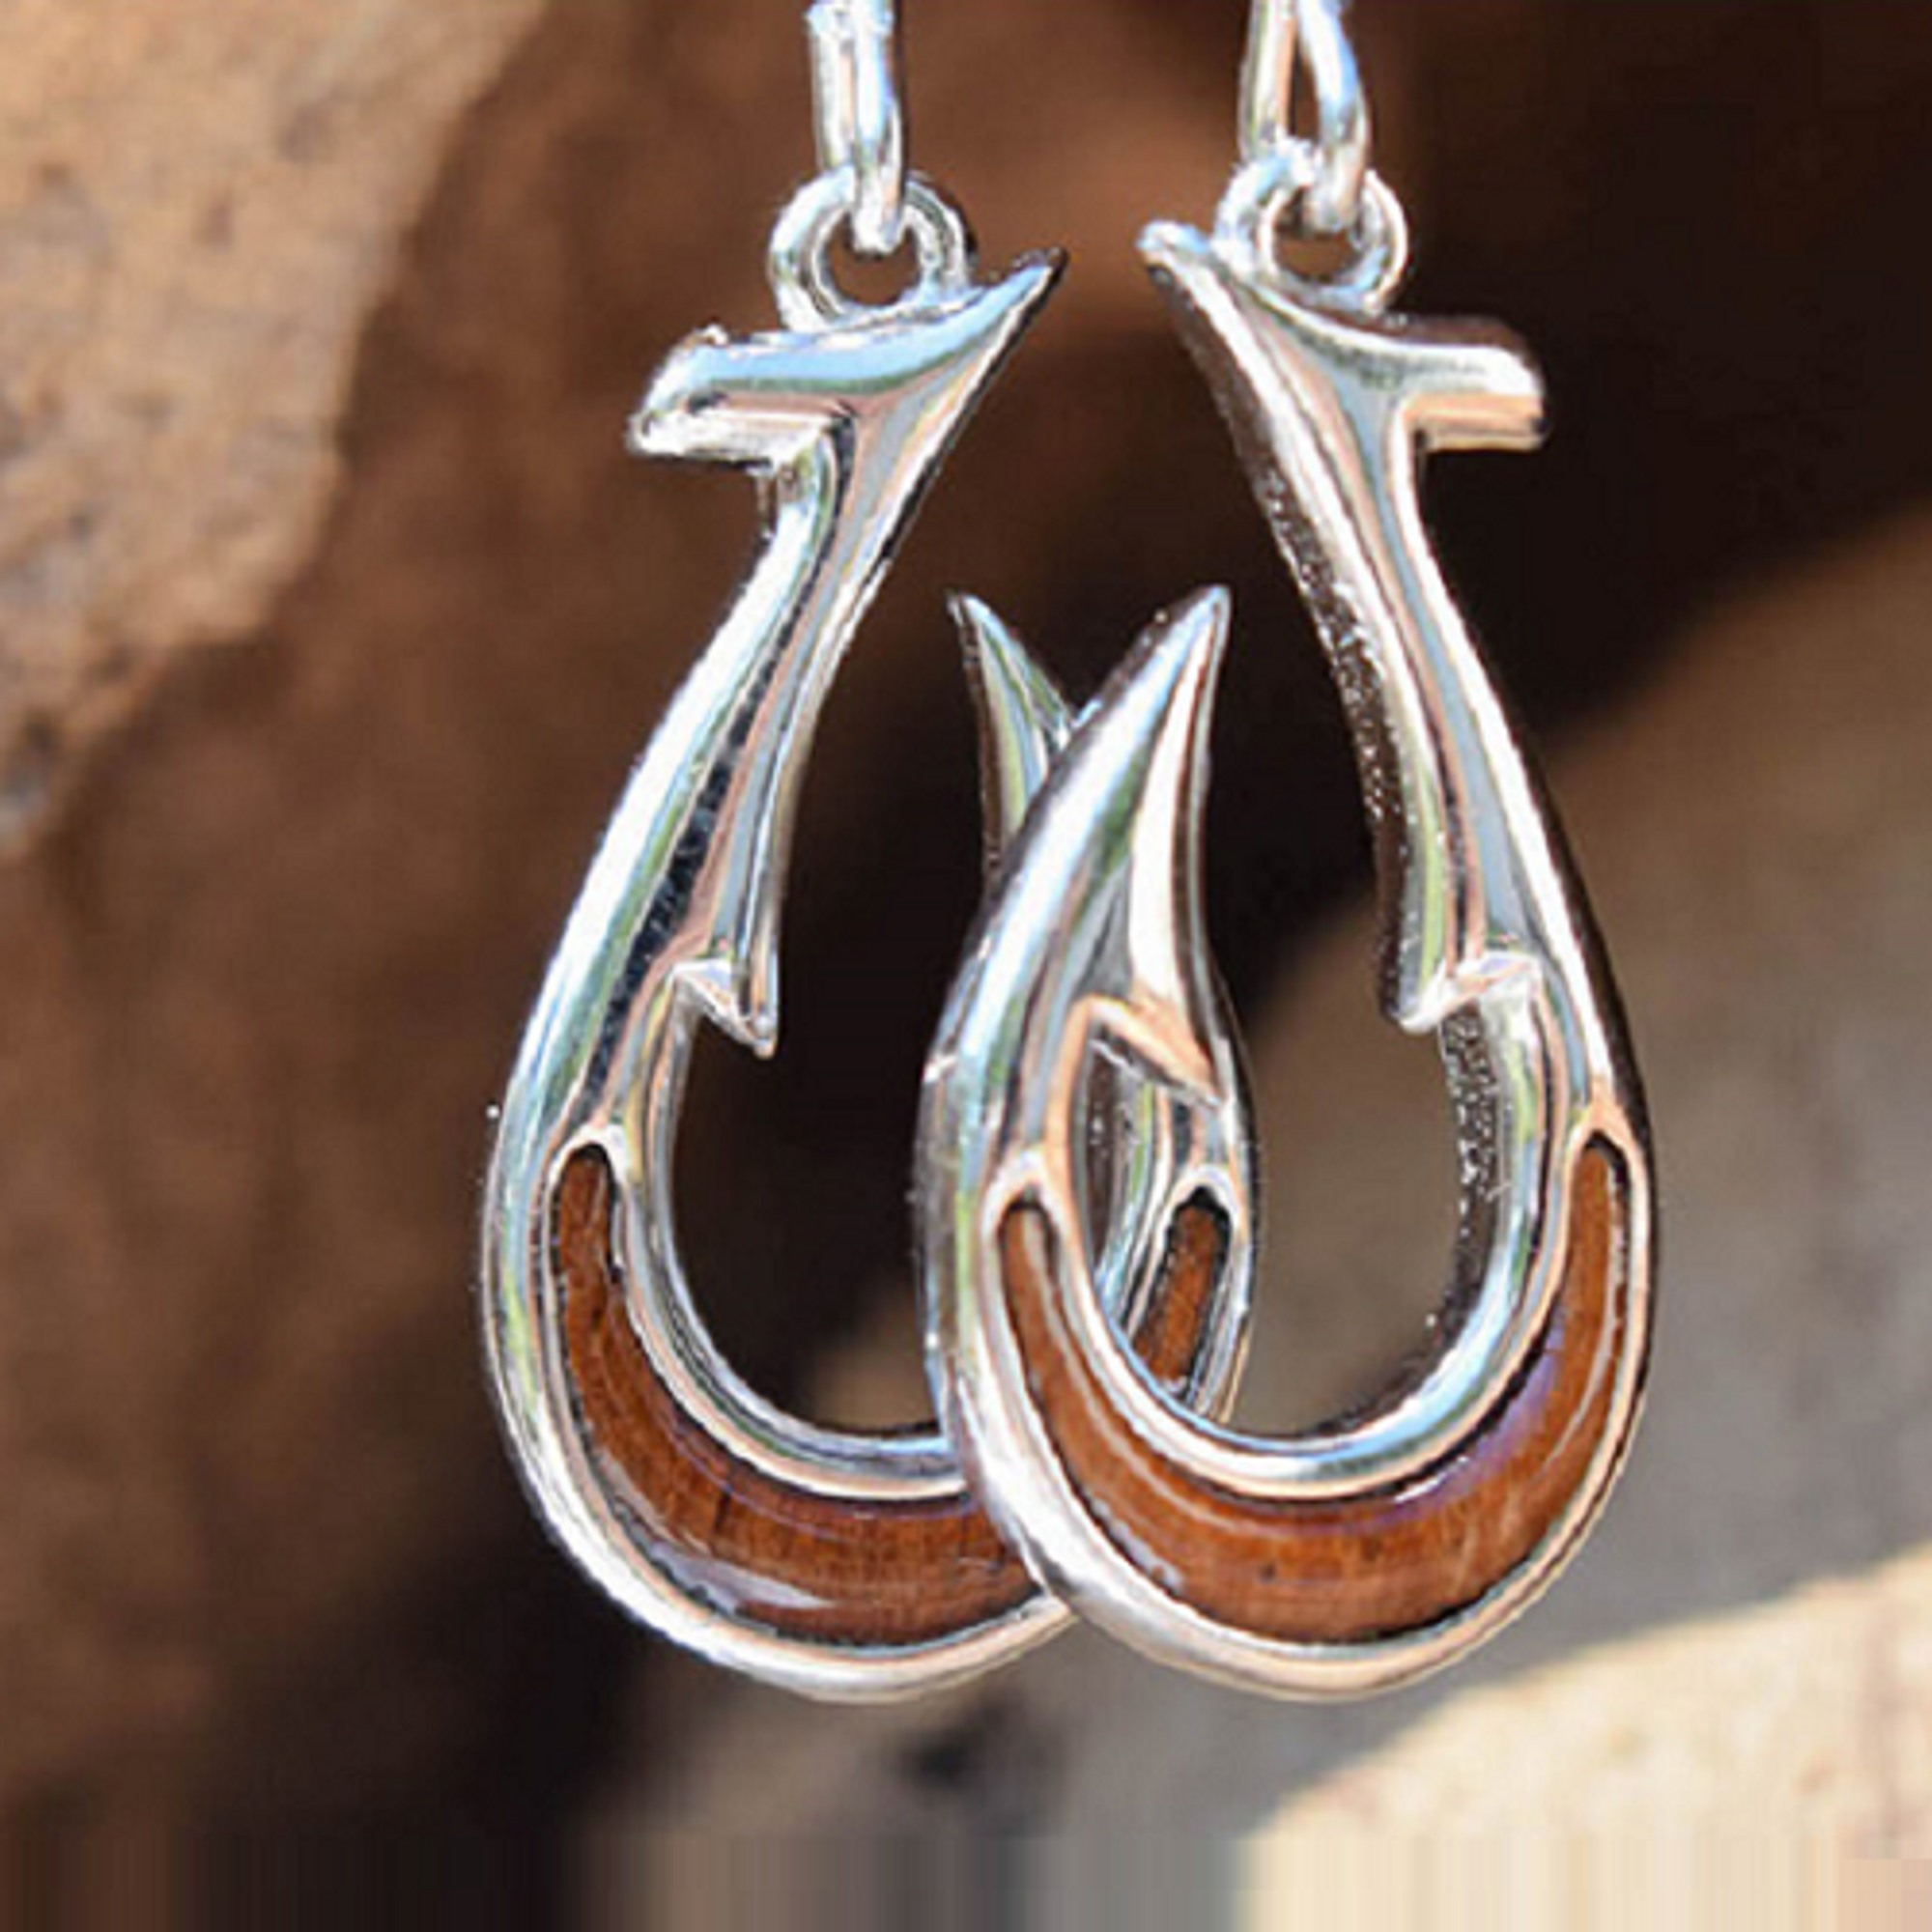 Fish Hook Sterling Silver and Koa Wood Earrings | Nature Jewelry